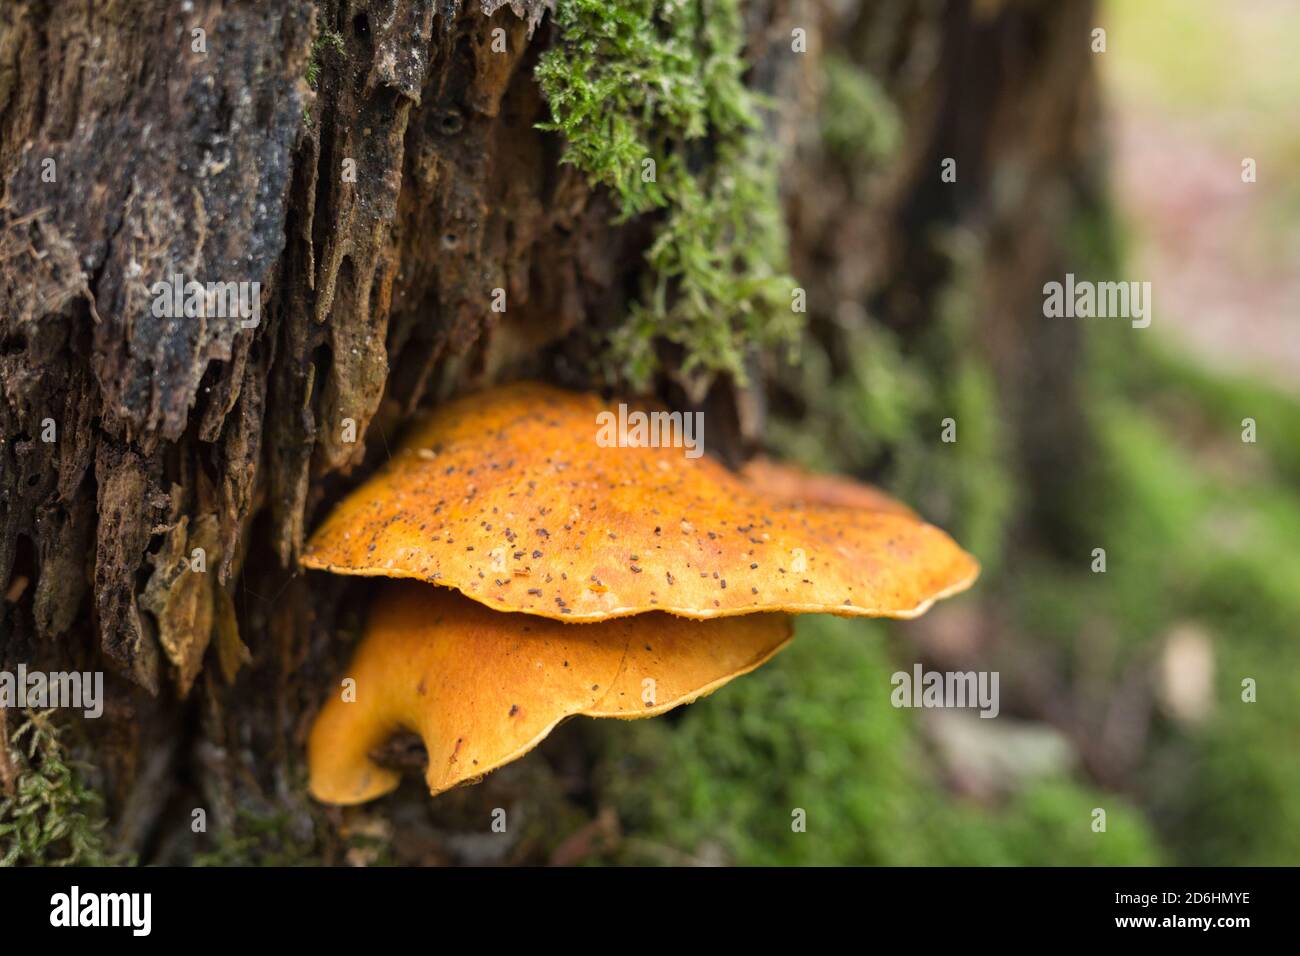 Toadstools at the trunk of a tree in autumn, Europe Stock Photo